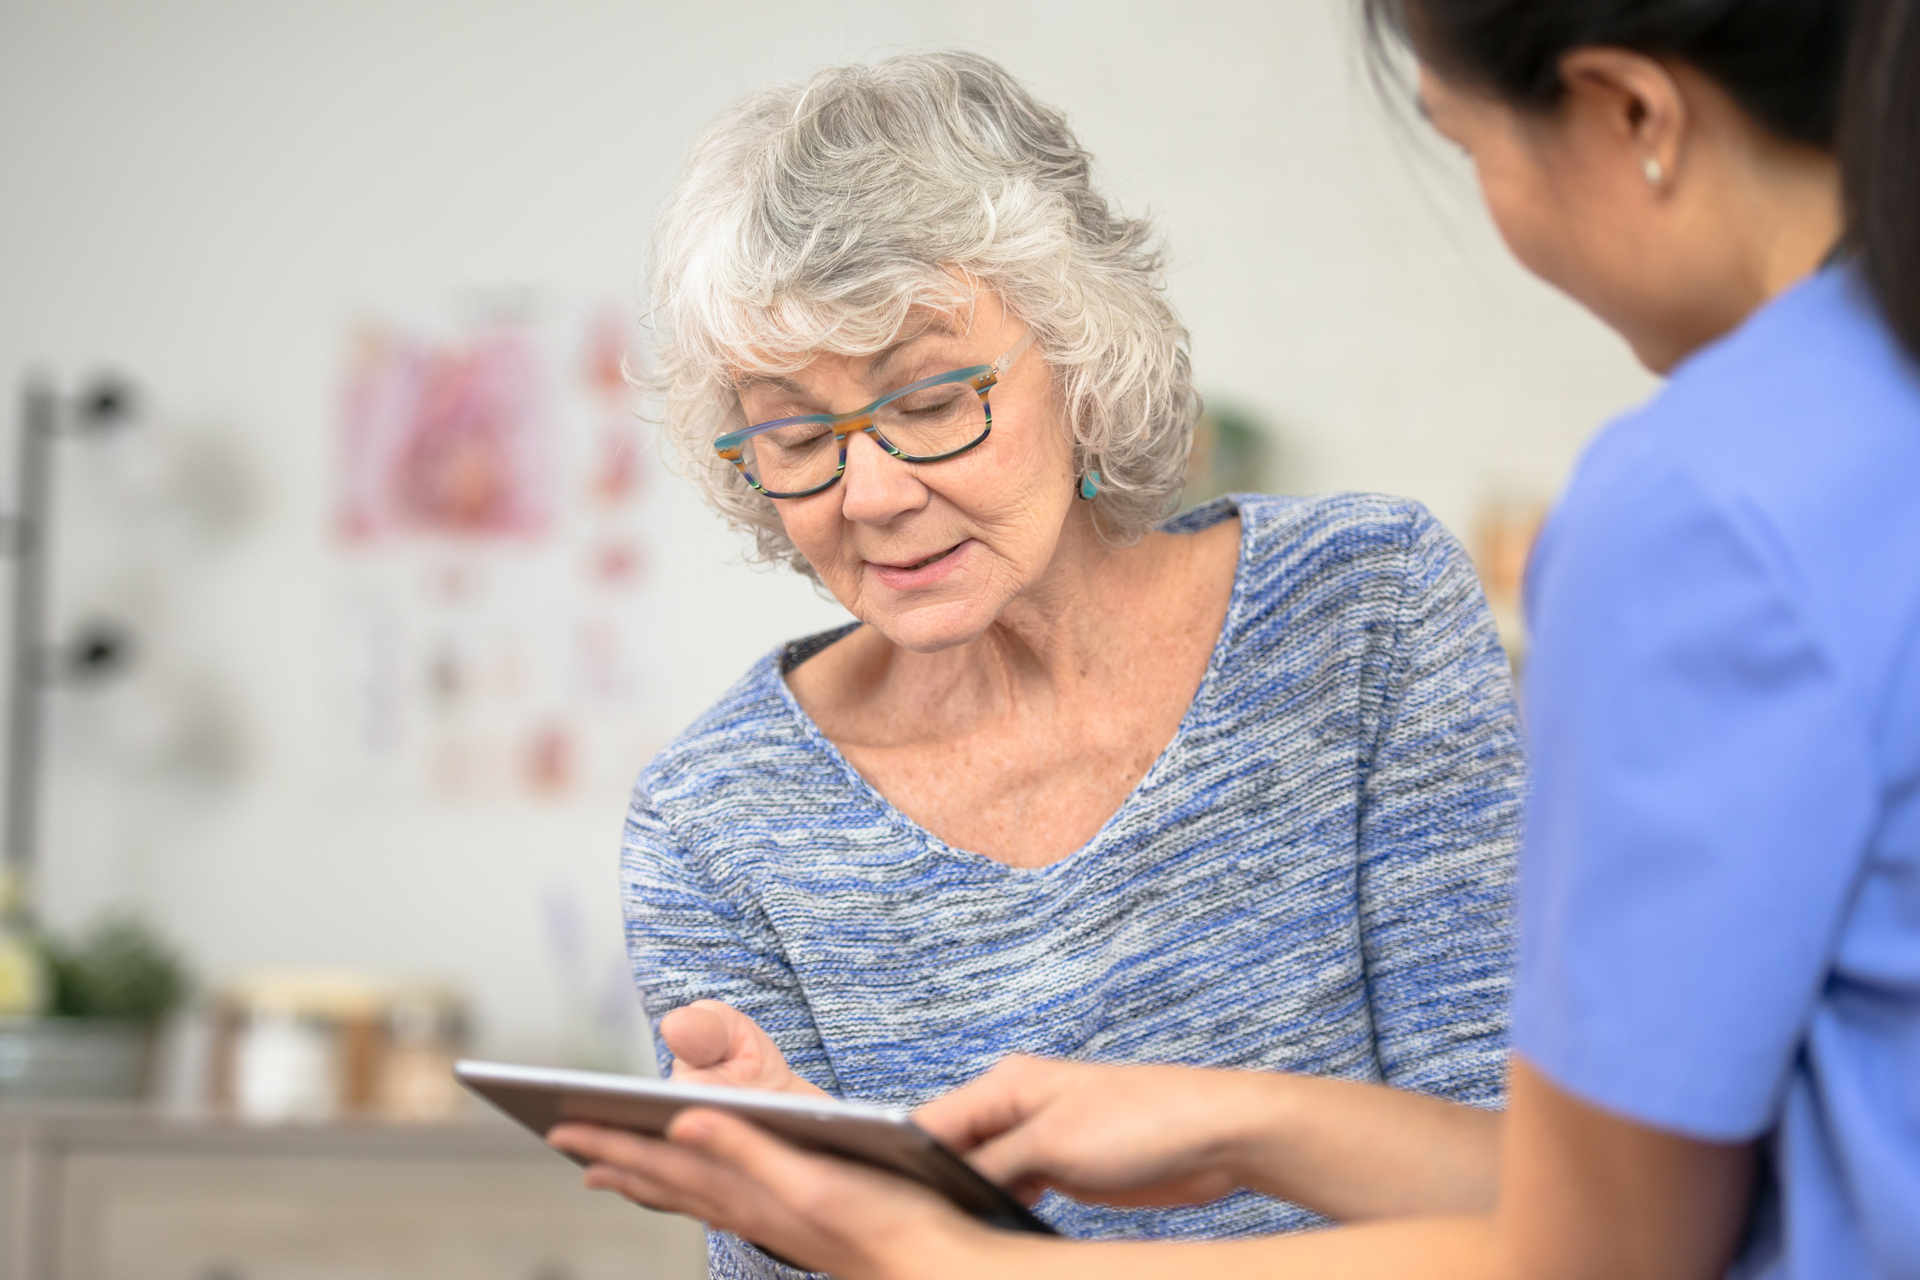 Senior patient reviews medical data on tablet with nurse